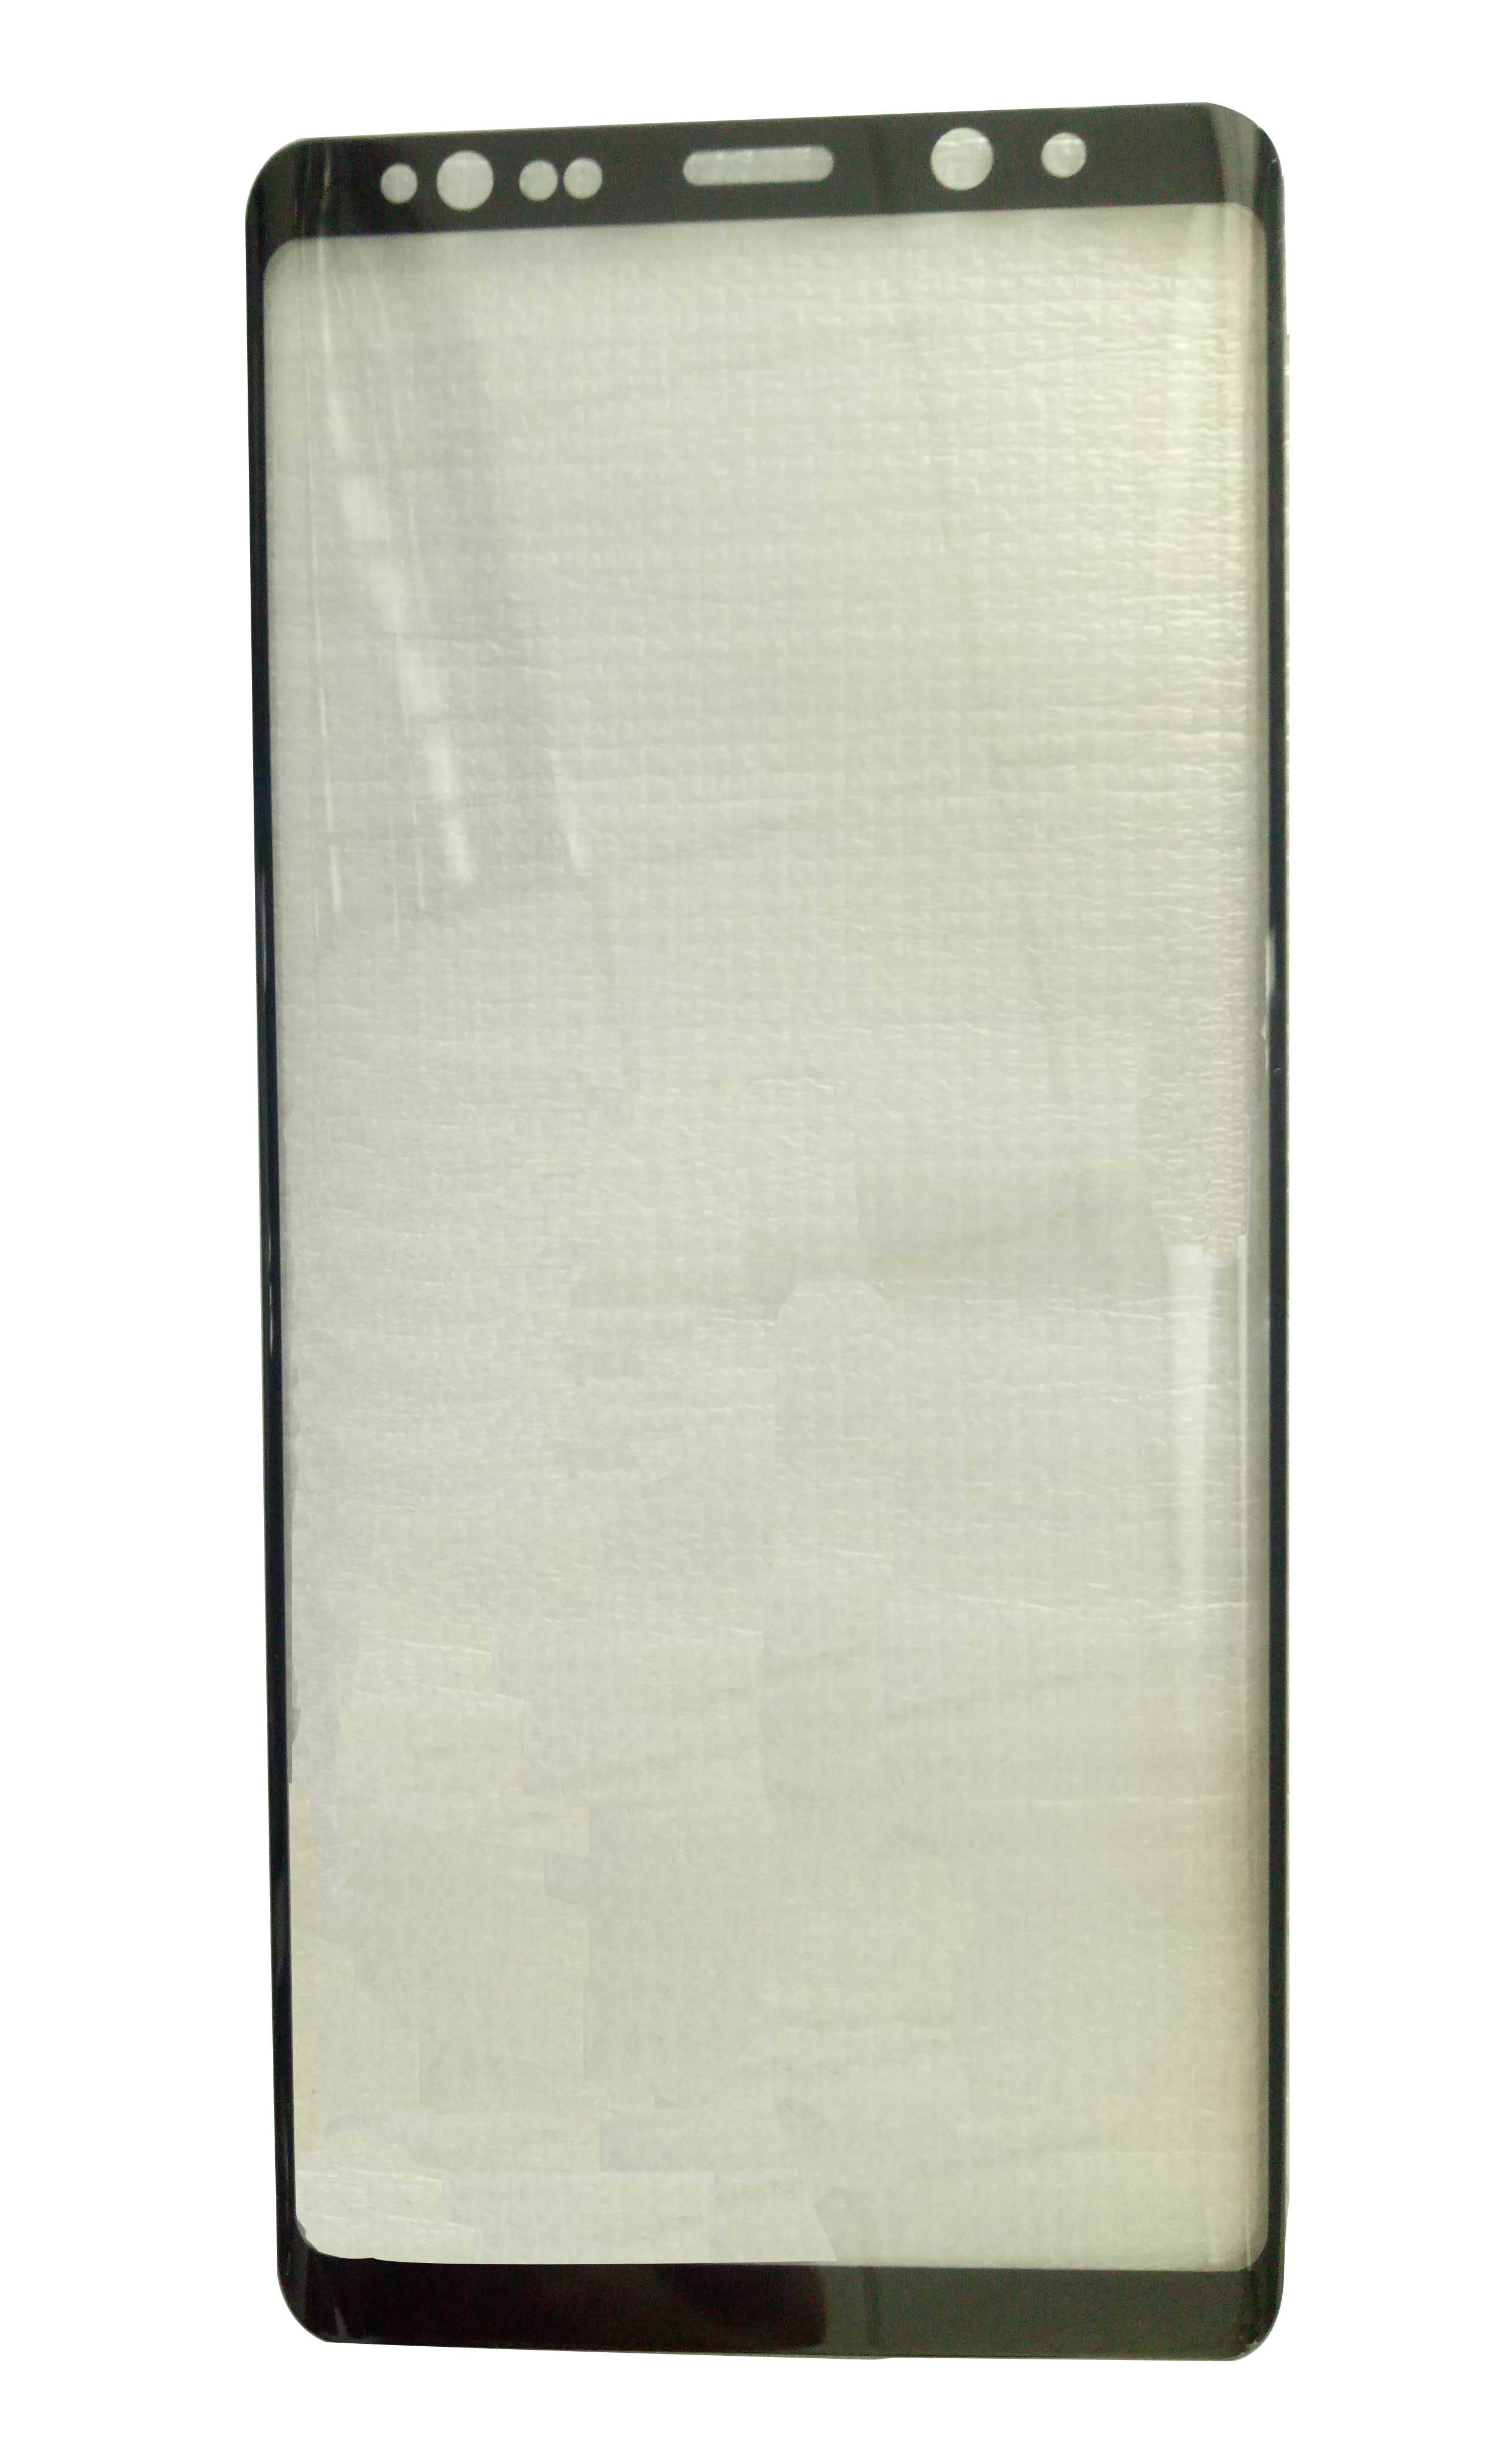 Full Coverage Tempered Glass Screen Protector - 3D Edge to Edge Coverage, 